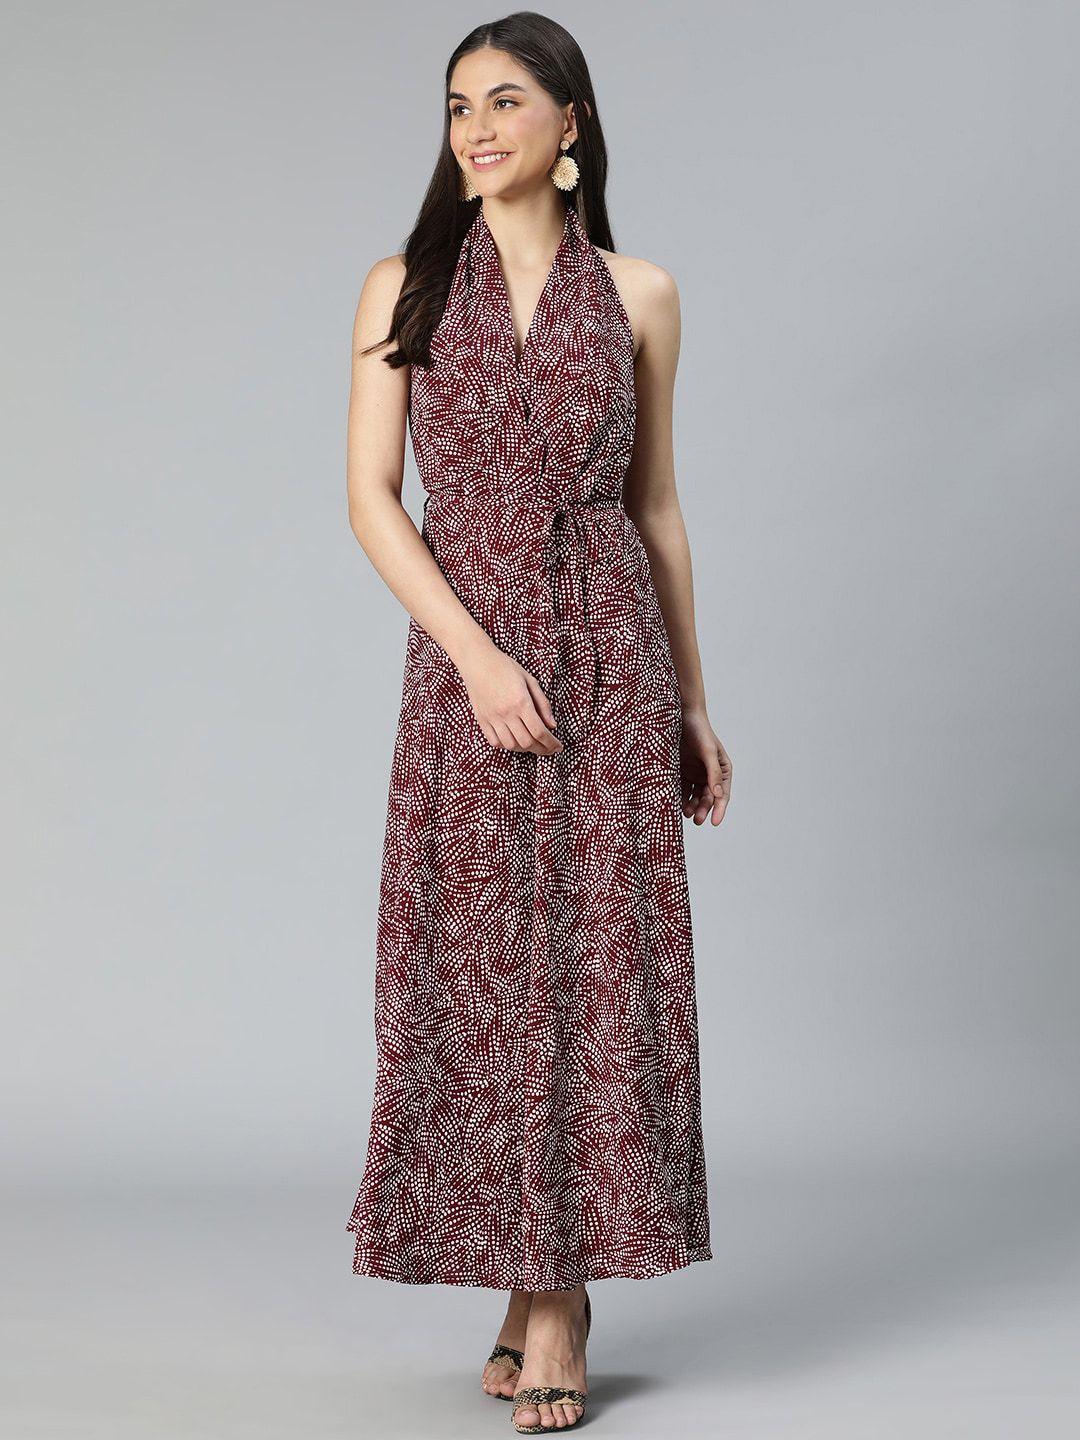 oxolloxo maroon floral tie-up neck maxi dress